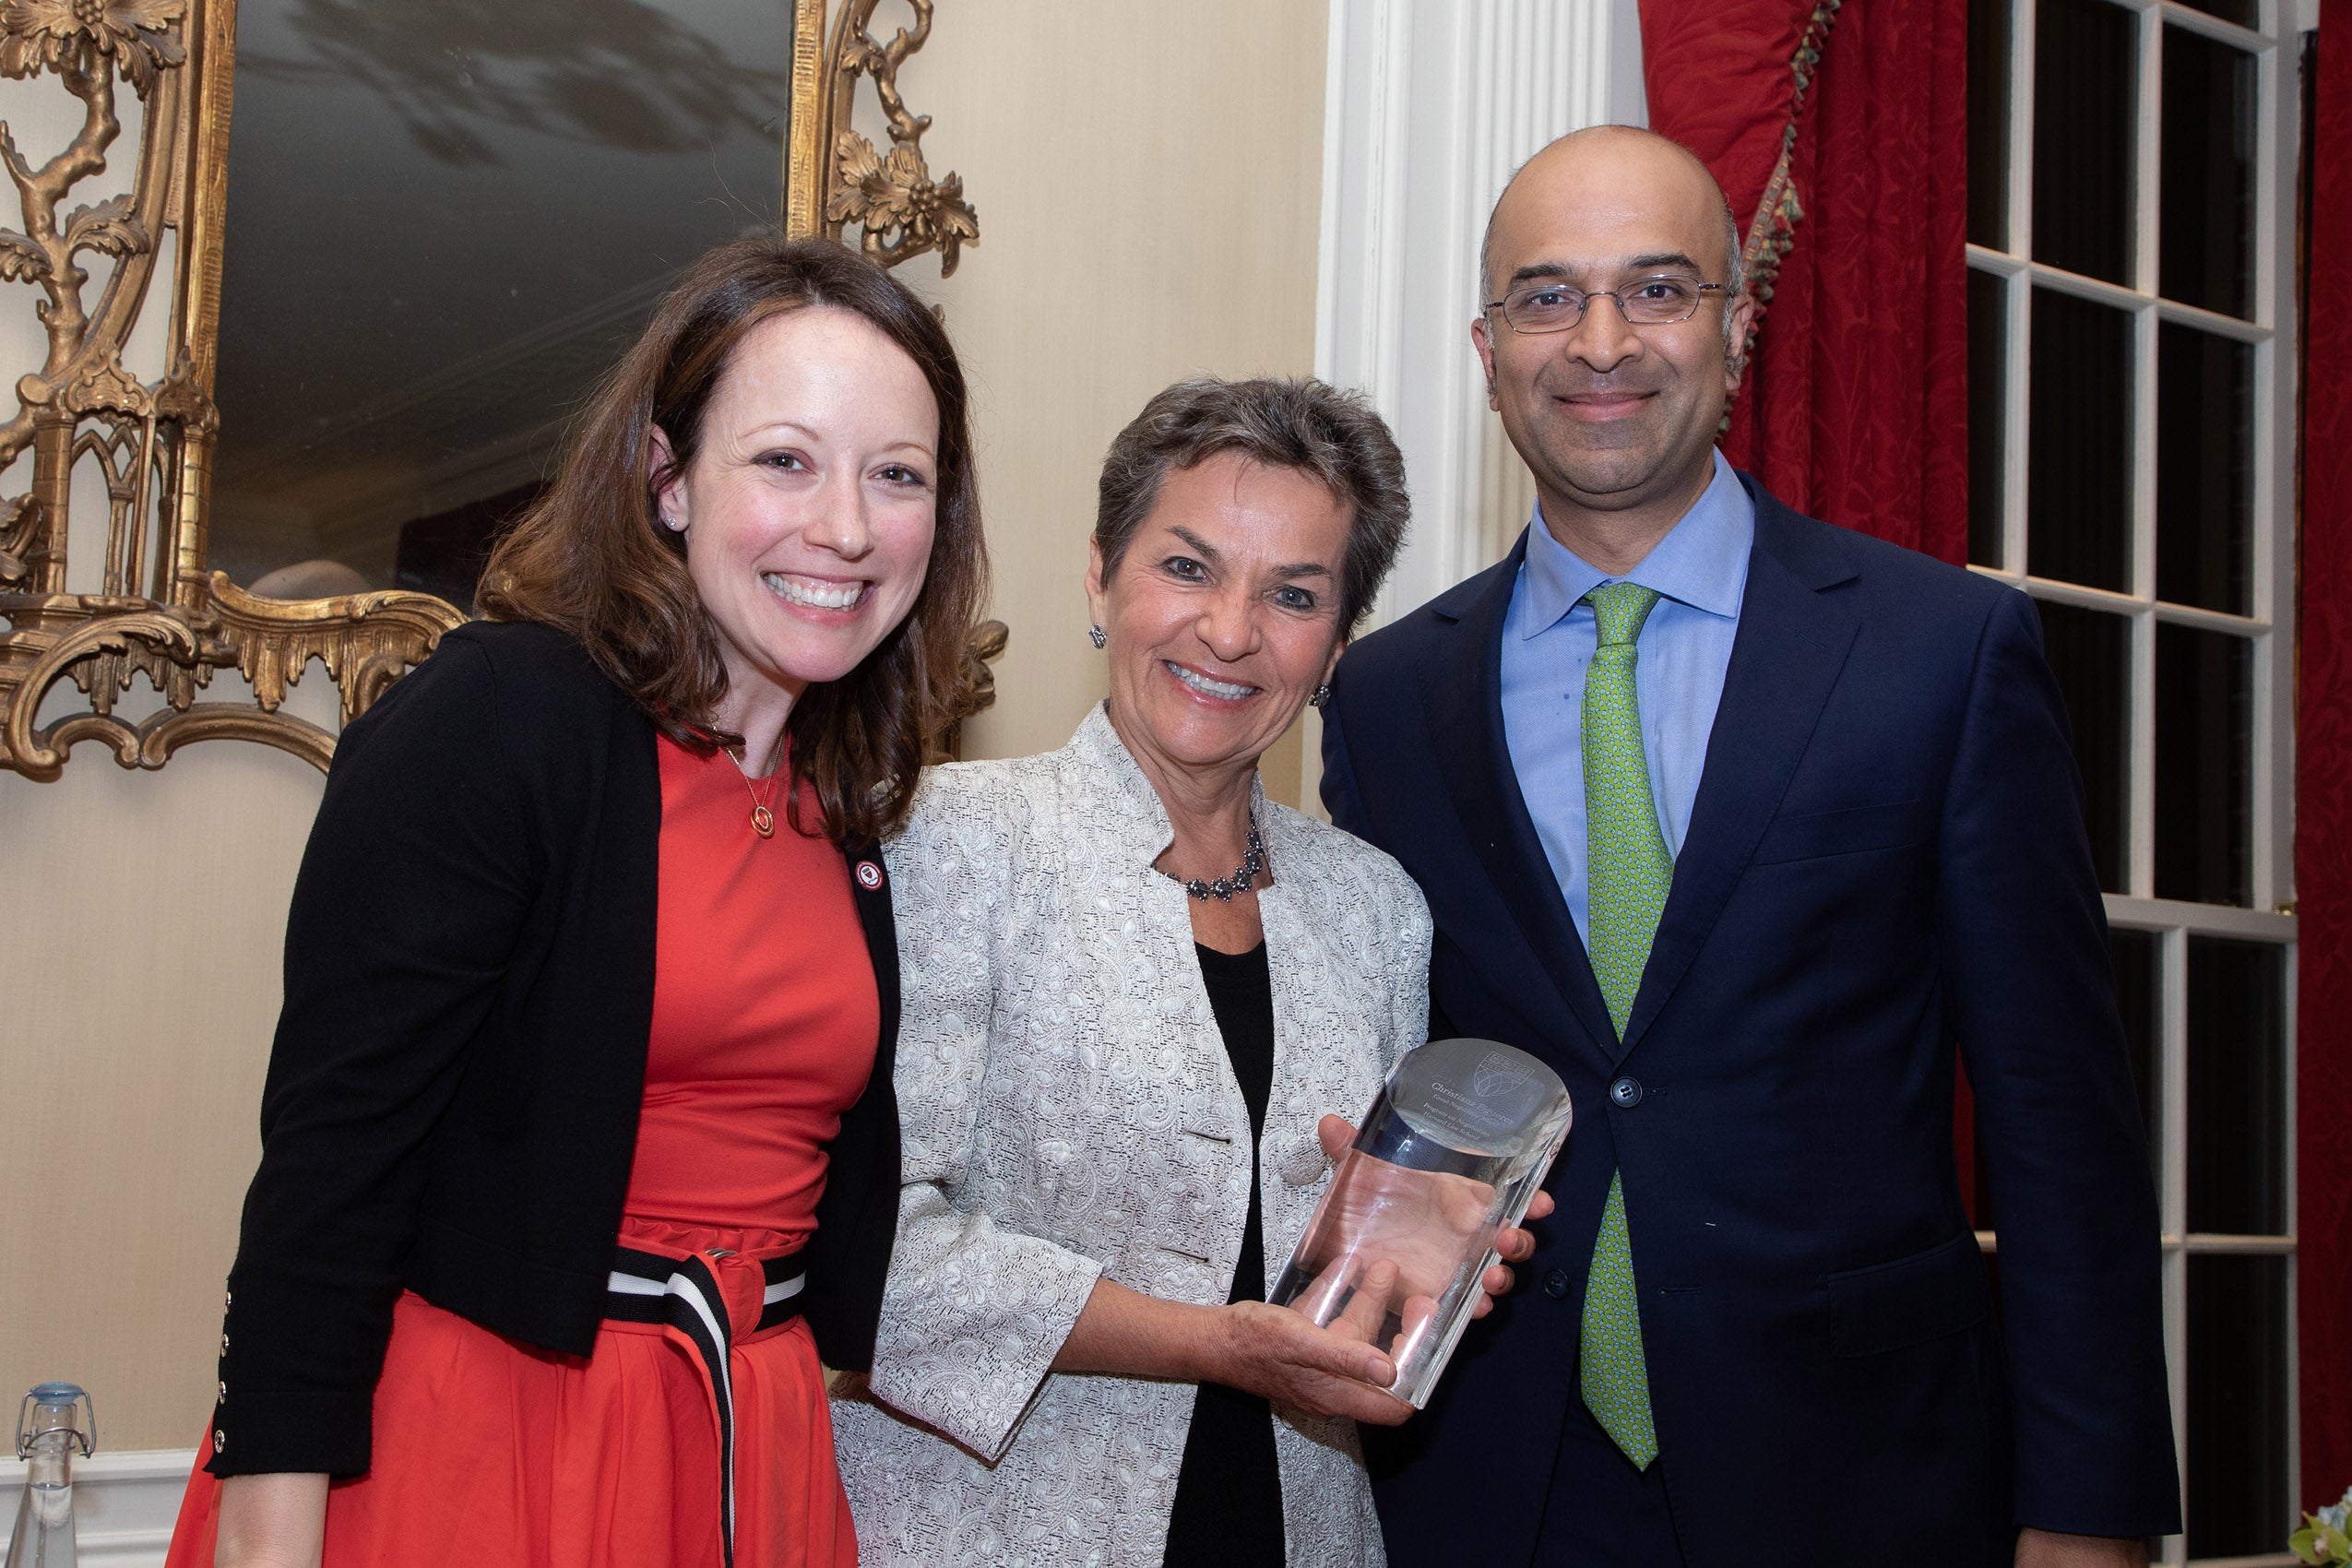 Christiana Figueres poses for a photo with two others while holding her Great Negotiator award.